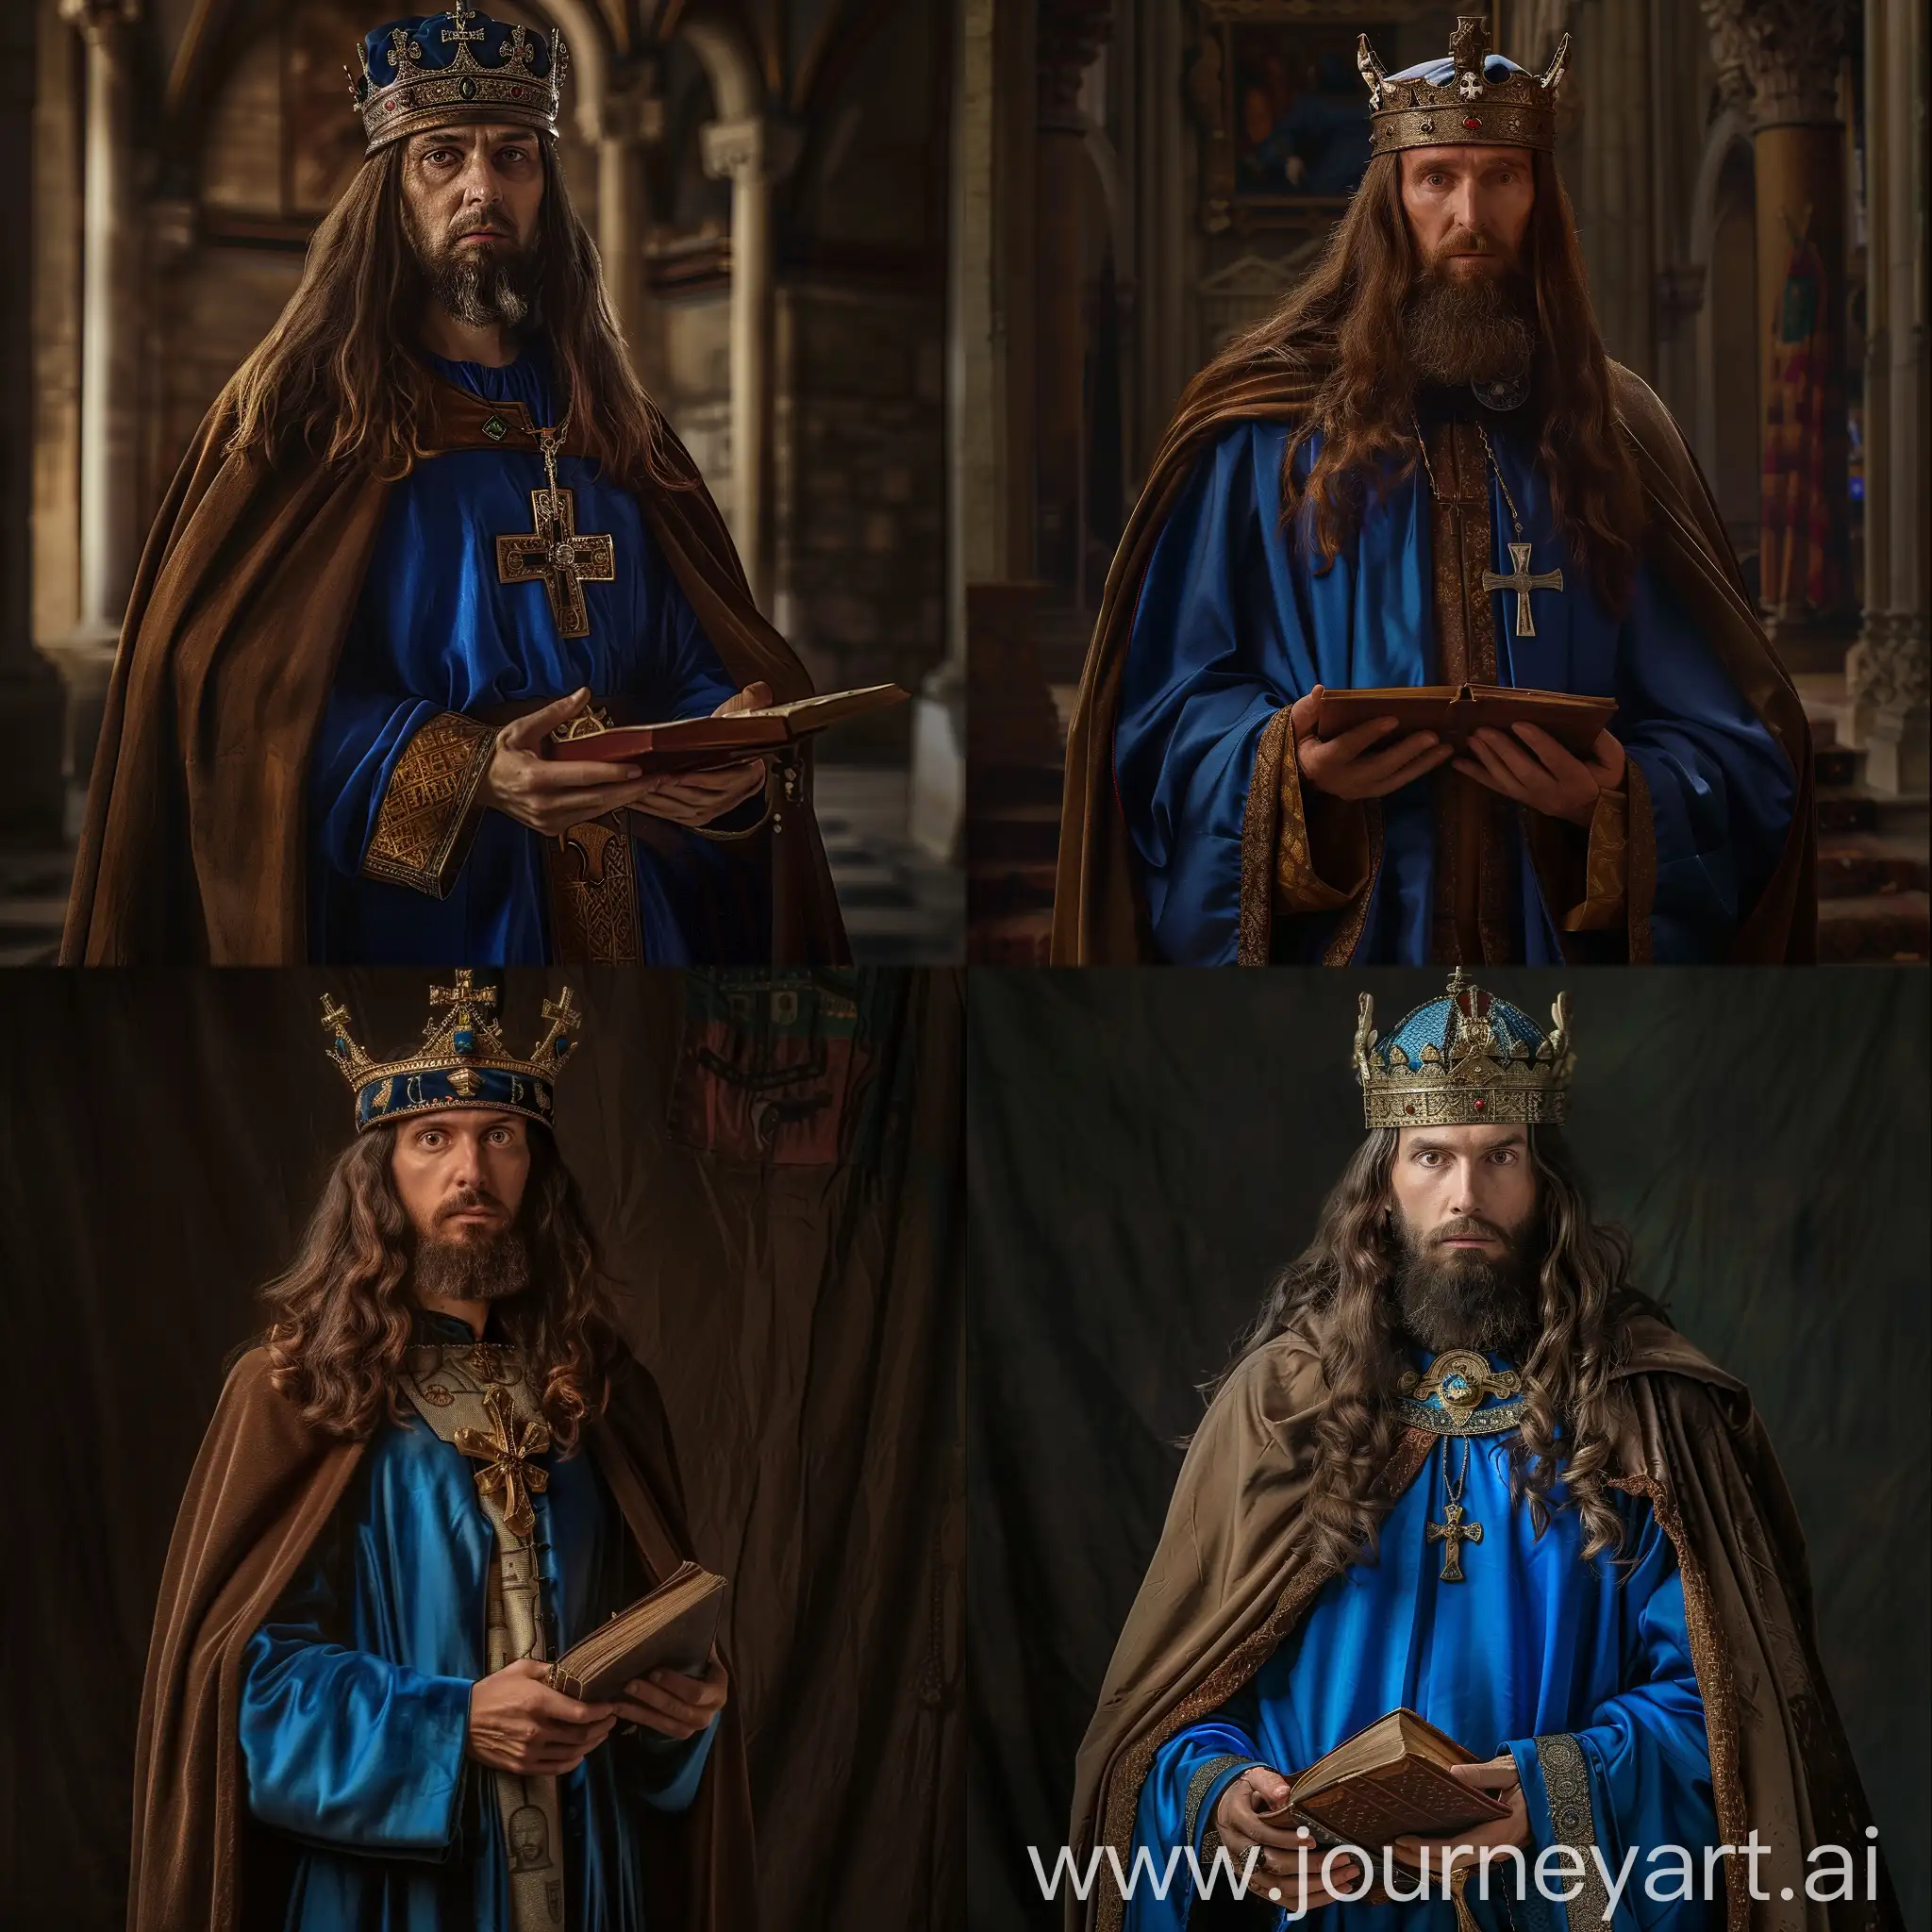 King of Hungary Stephen I, depicted in blue silk
robe and brown cape, wearing crown hat of hungary
with a small cross on it, long brown hair and
well shaped long beard, at his royal palace,
holding a medieval book and a cross in his
hands, cinematic lighting